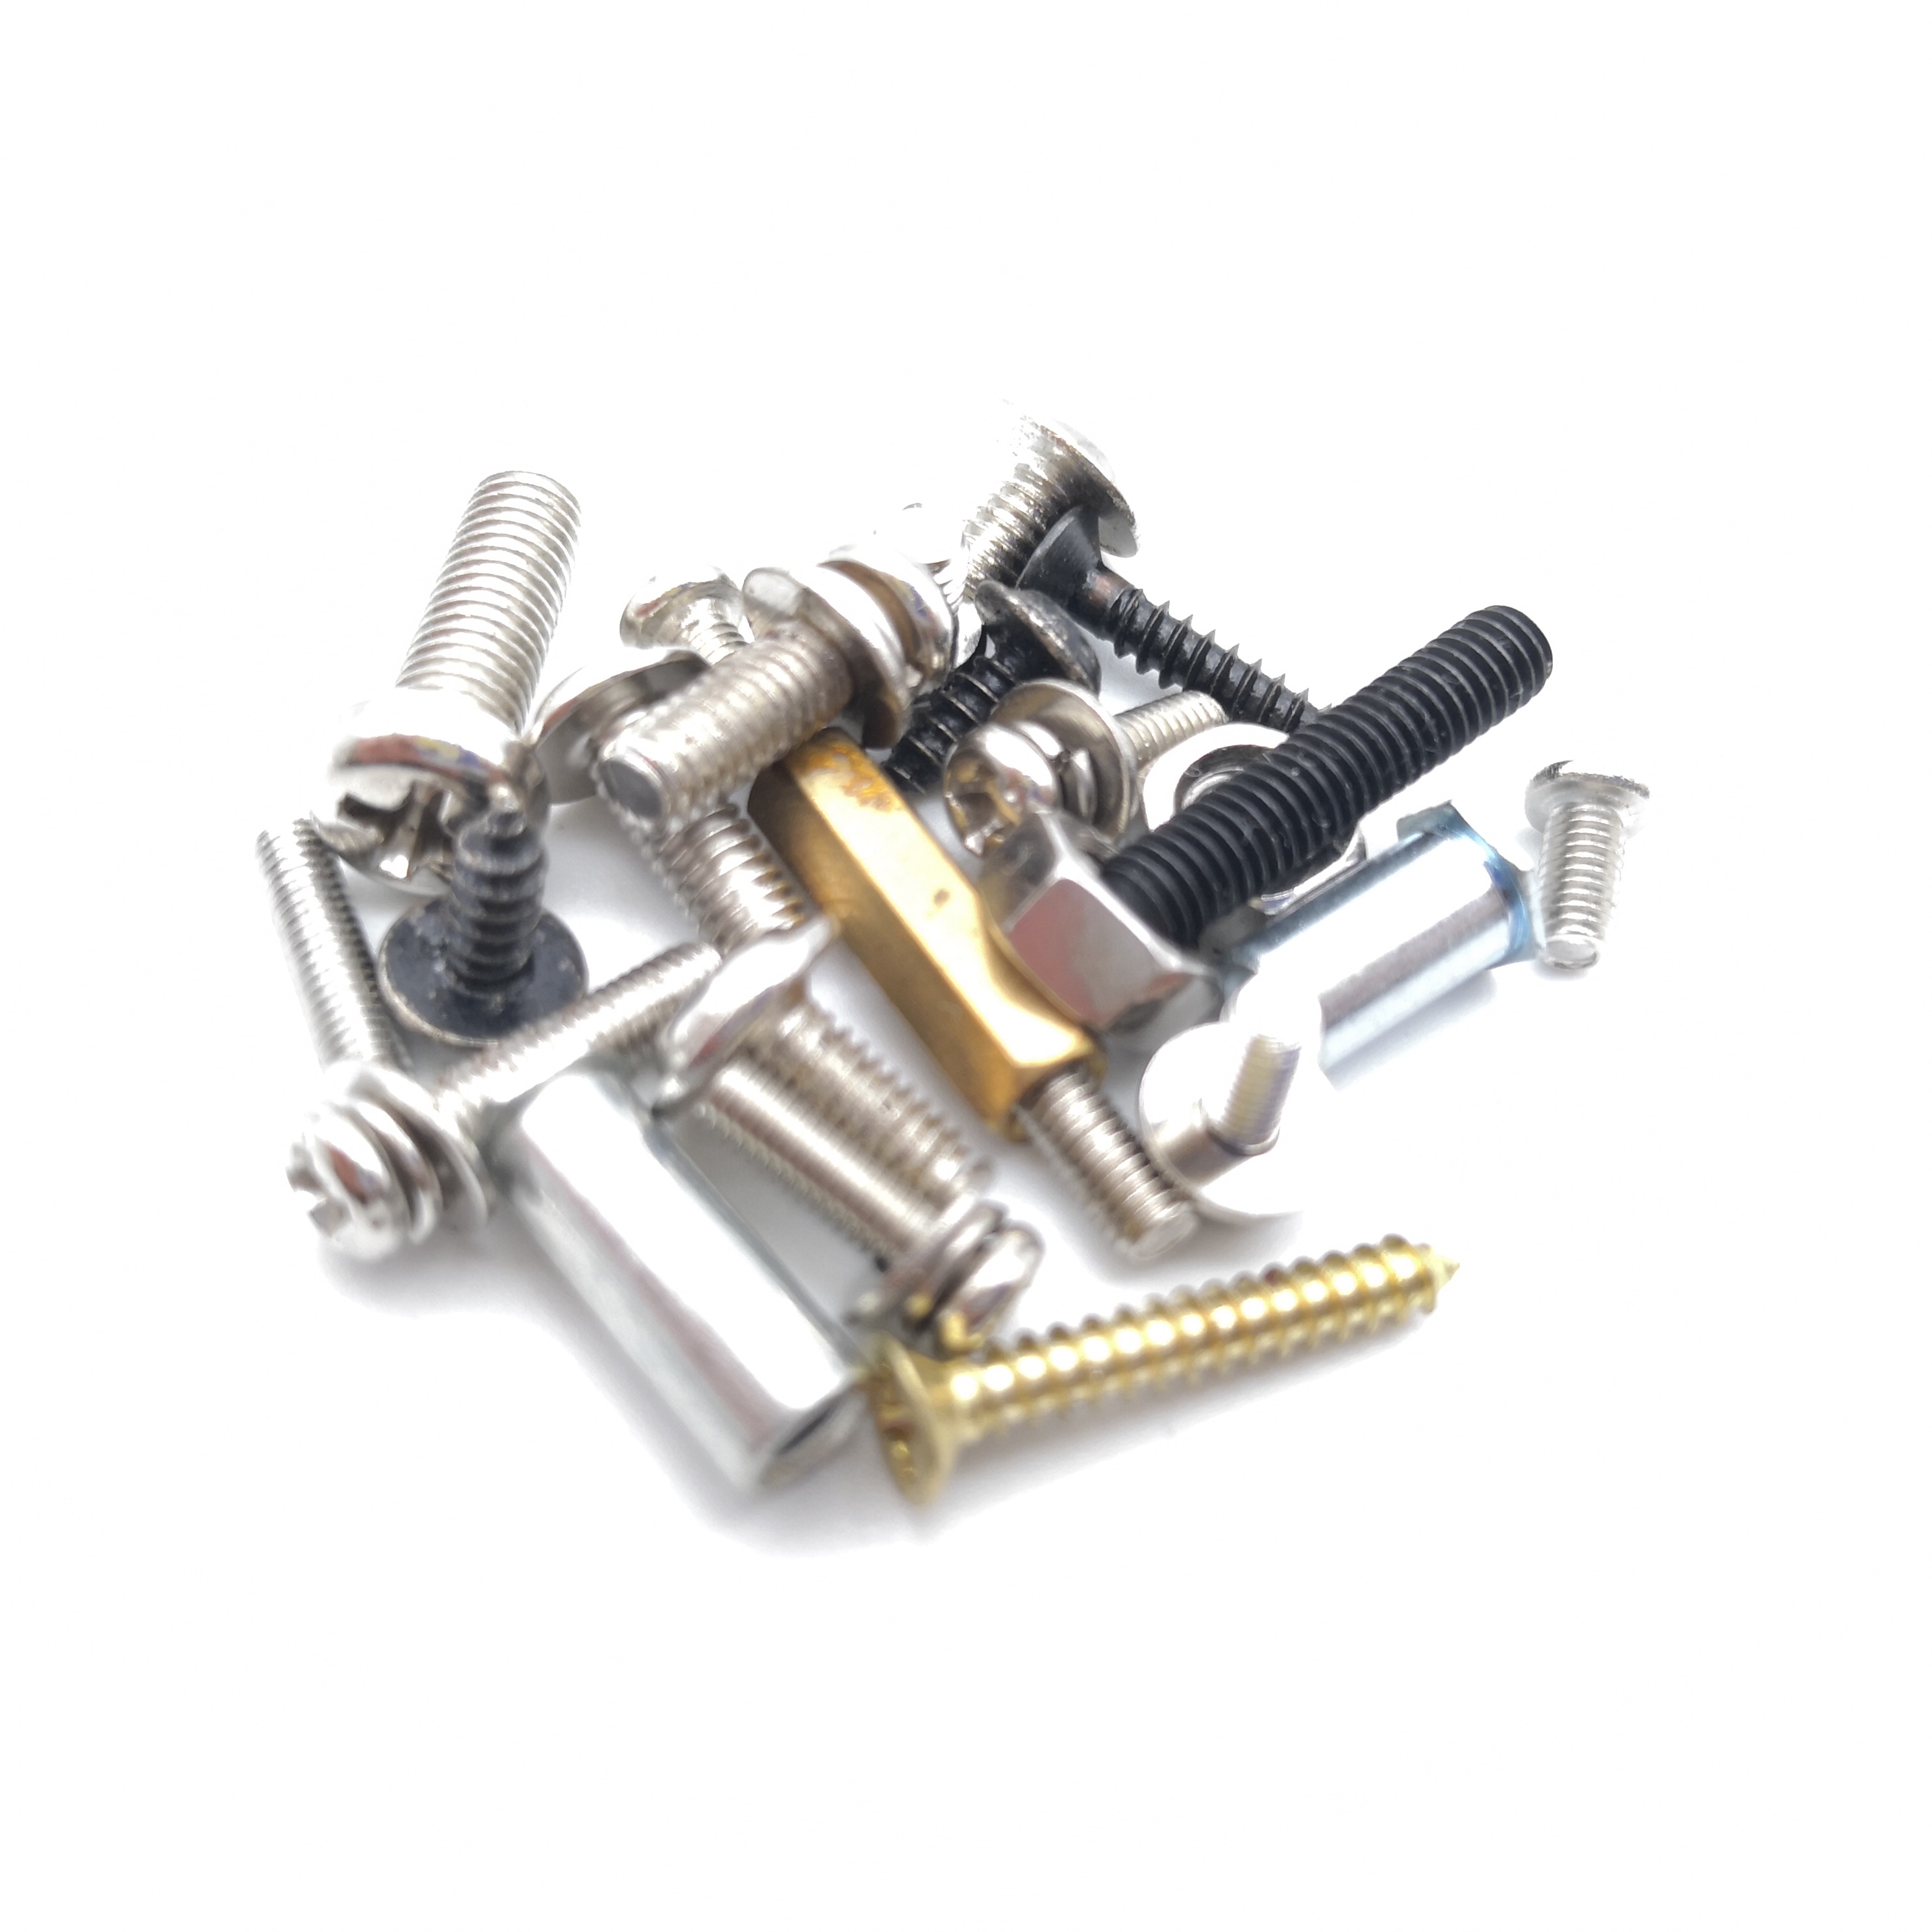 Nuts Service –  All series of screw products – RAISING-Elec